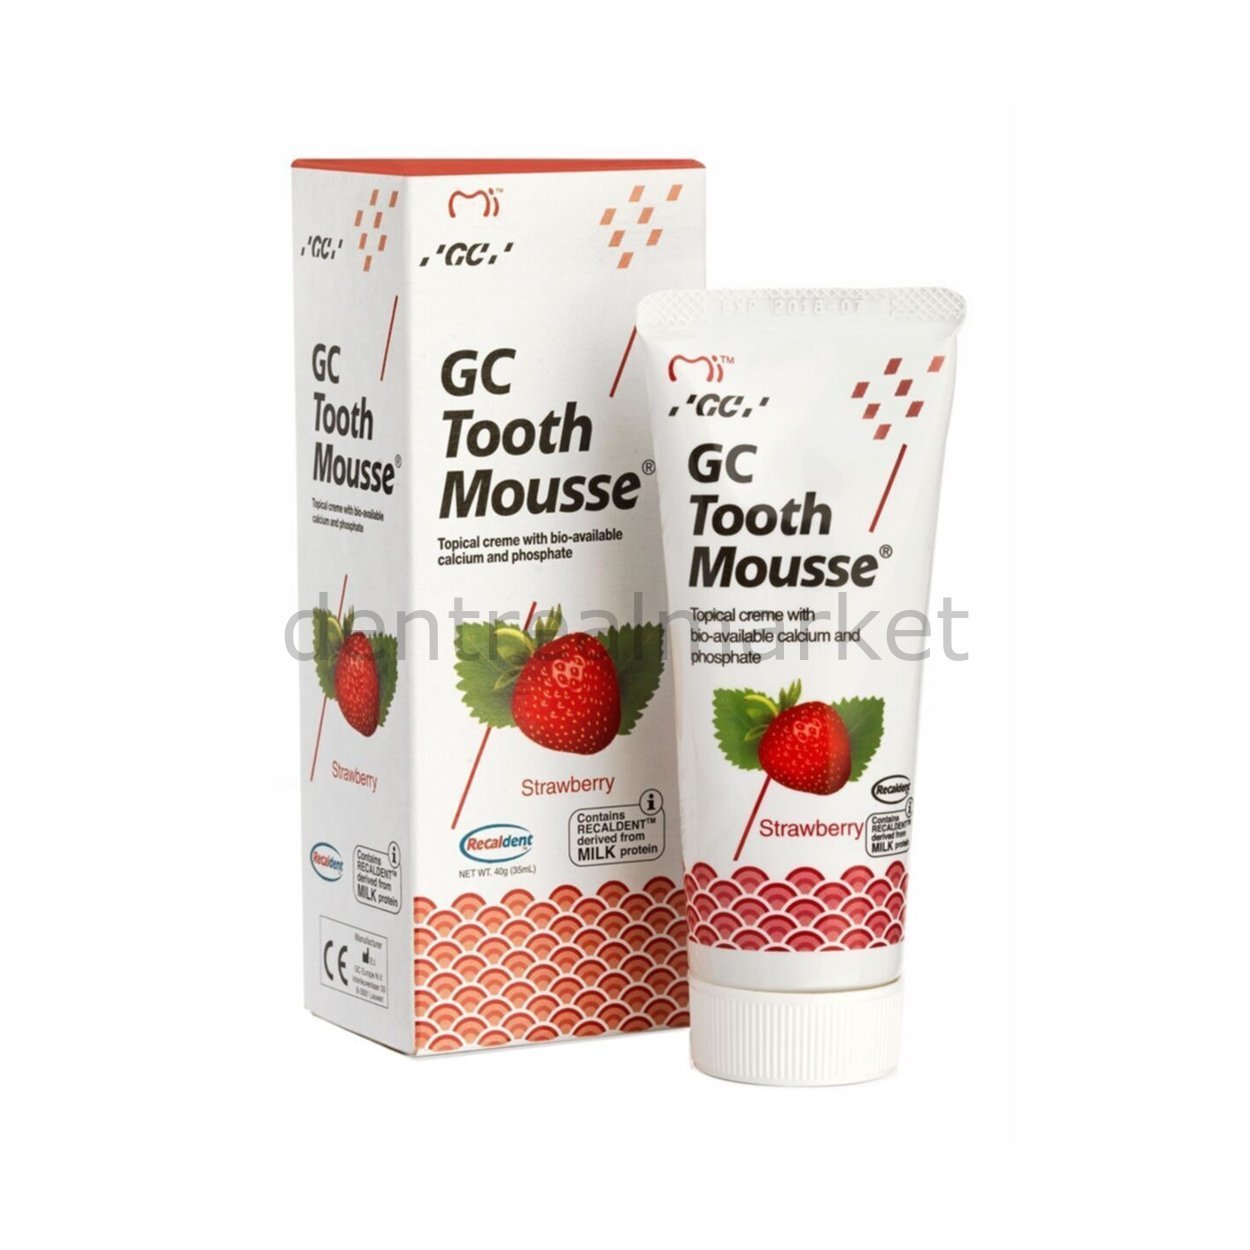 DentrealStore - Gc Dental Tooth Mousse Topical Cream 40 Gr - Strawberry